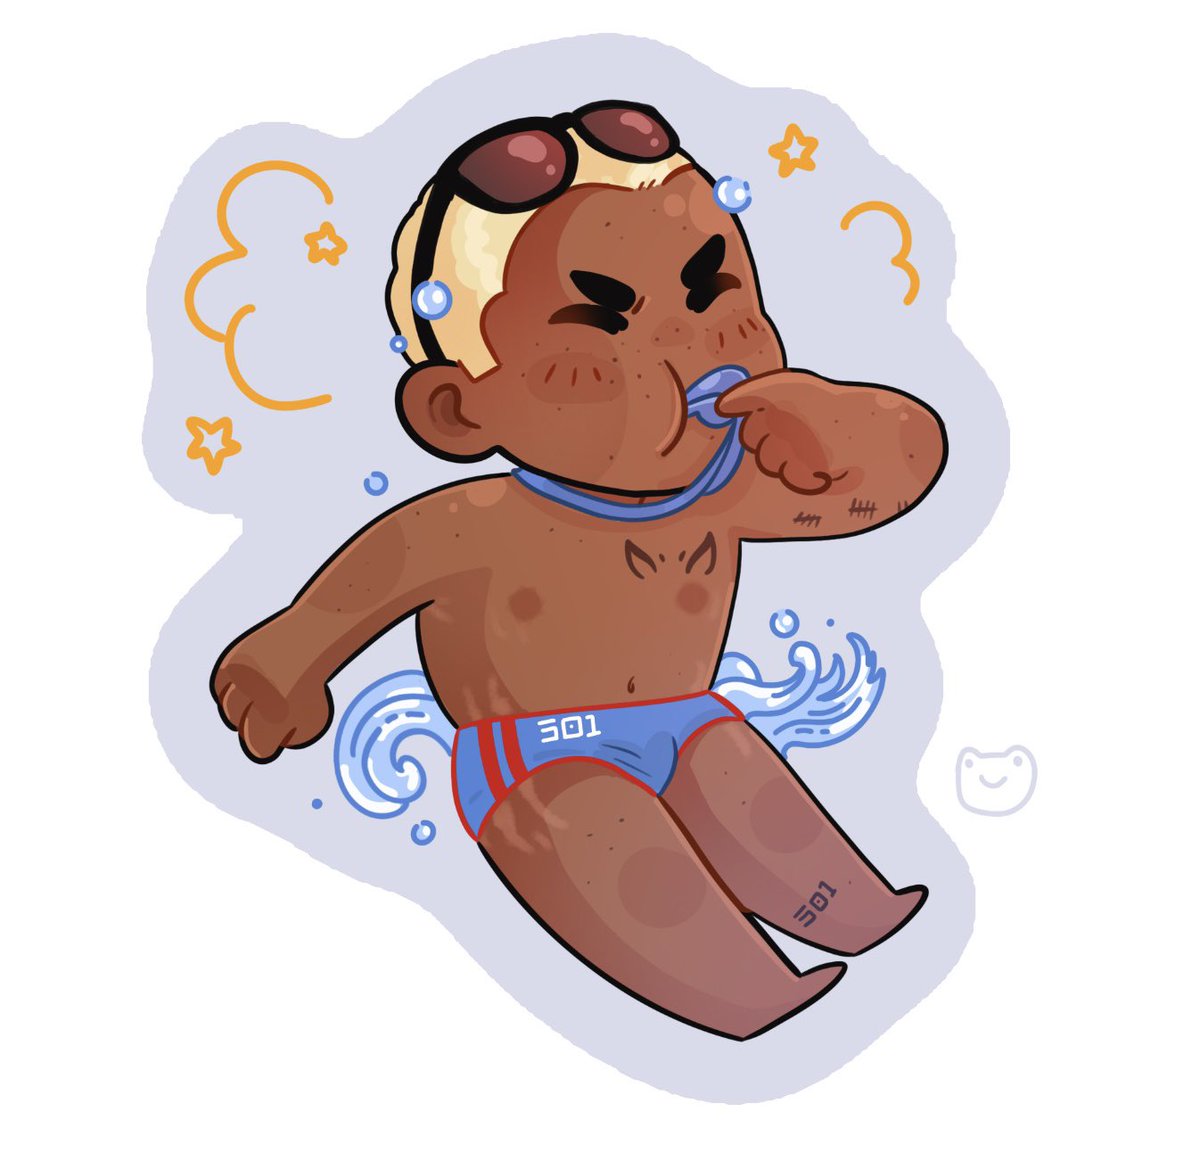 Thoughts on lifeguard Rex charm? Should I open preorders?